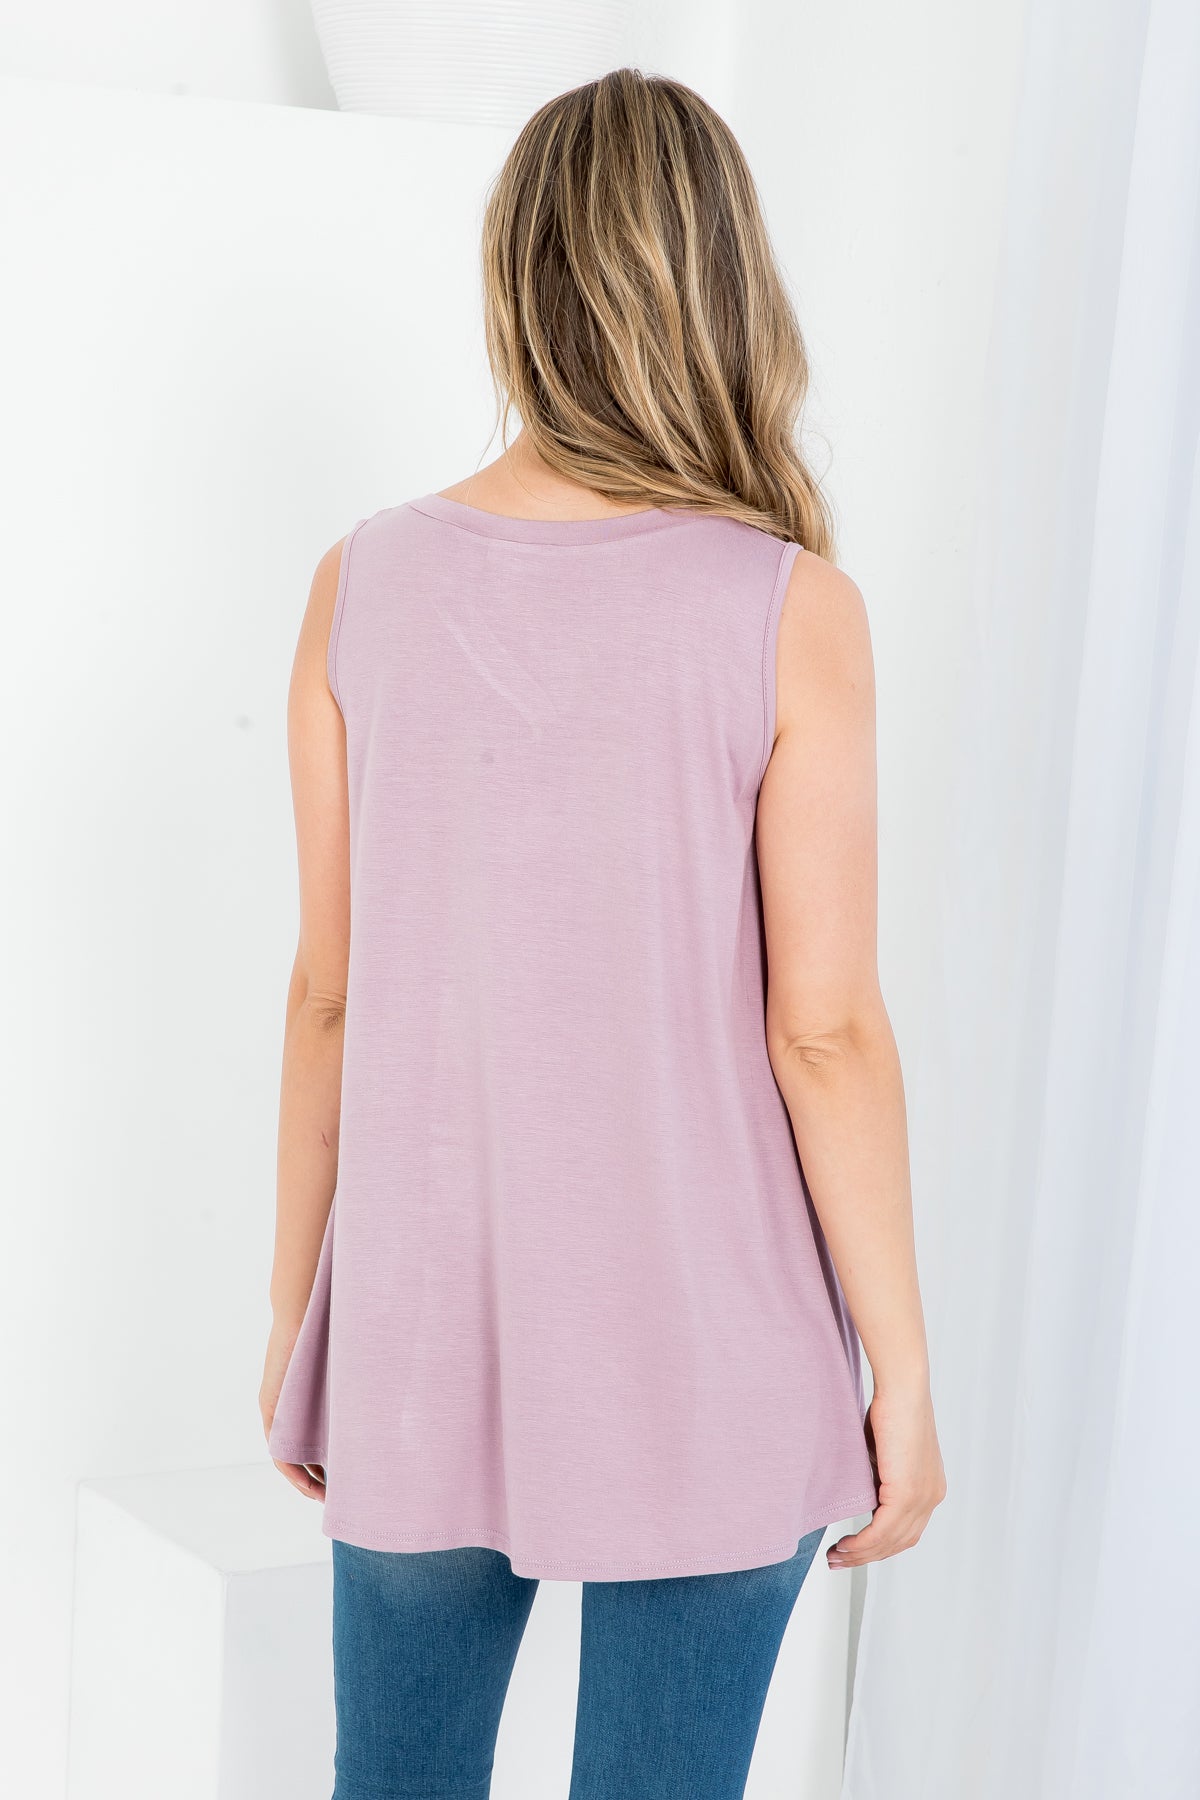 V-NECKLINE WITH BUTTONS SLEEVELESS TOP 2-2-2-2